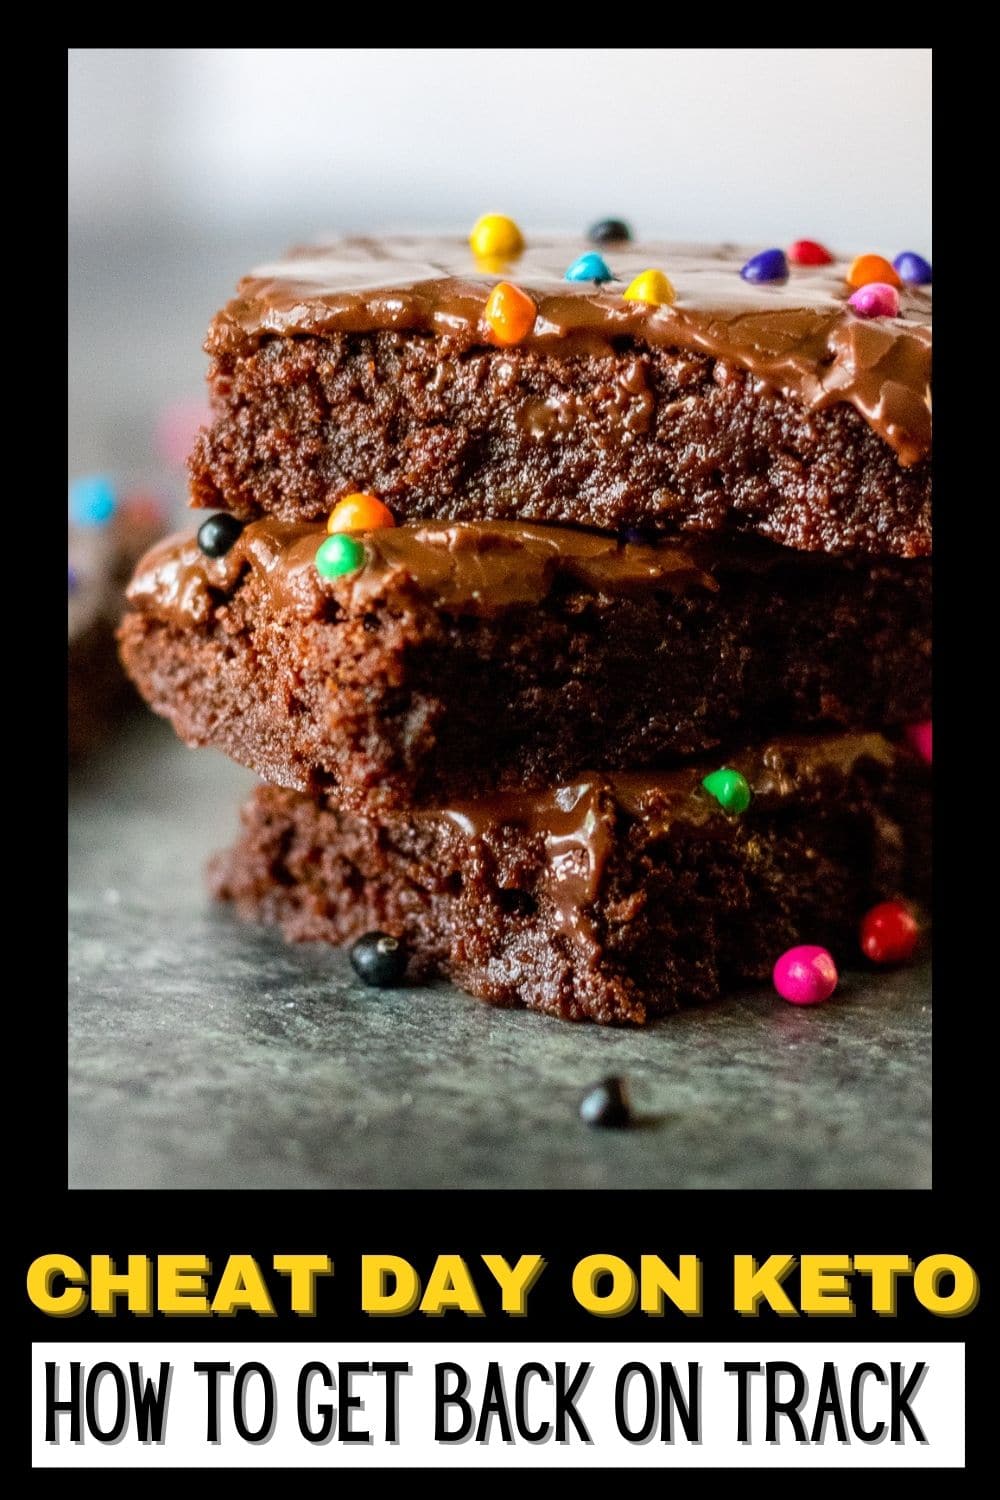 image for cheat day on keto with brownie image